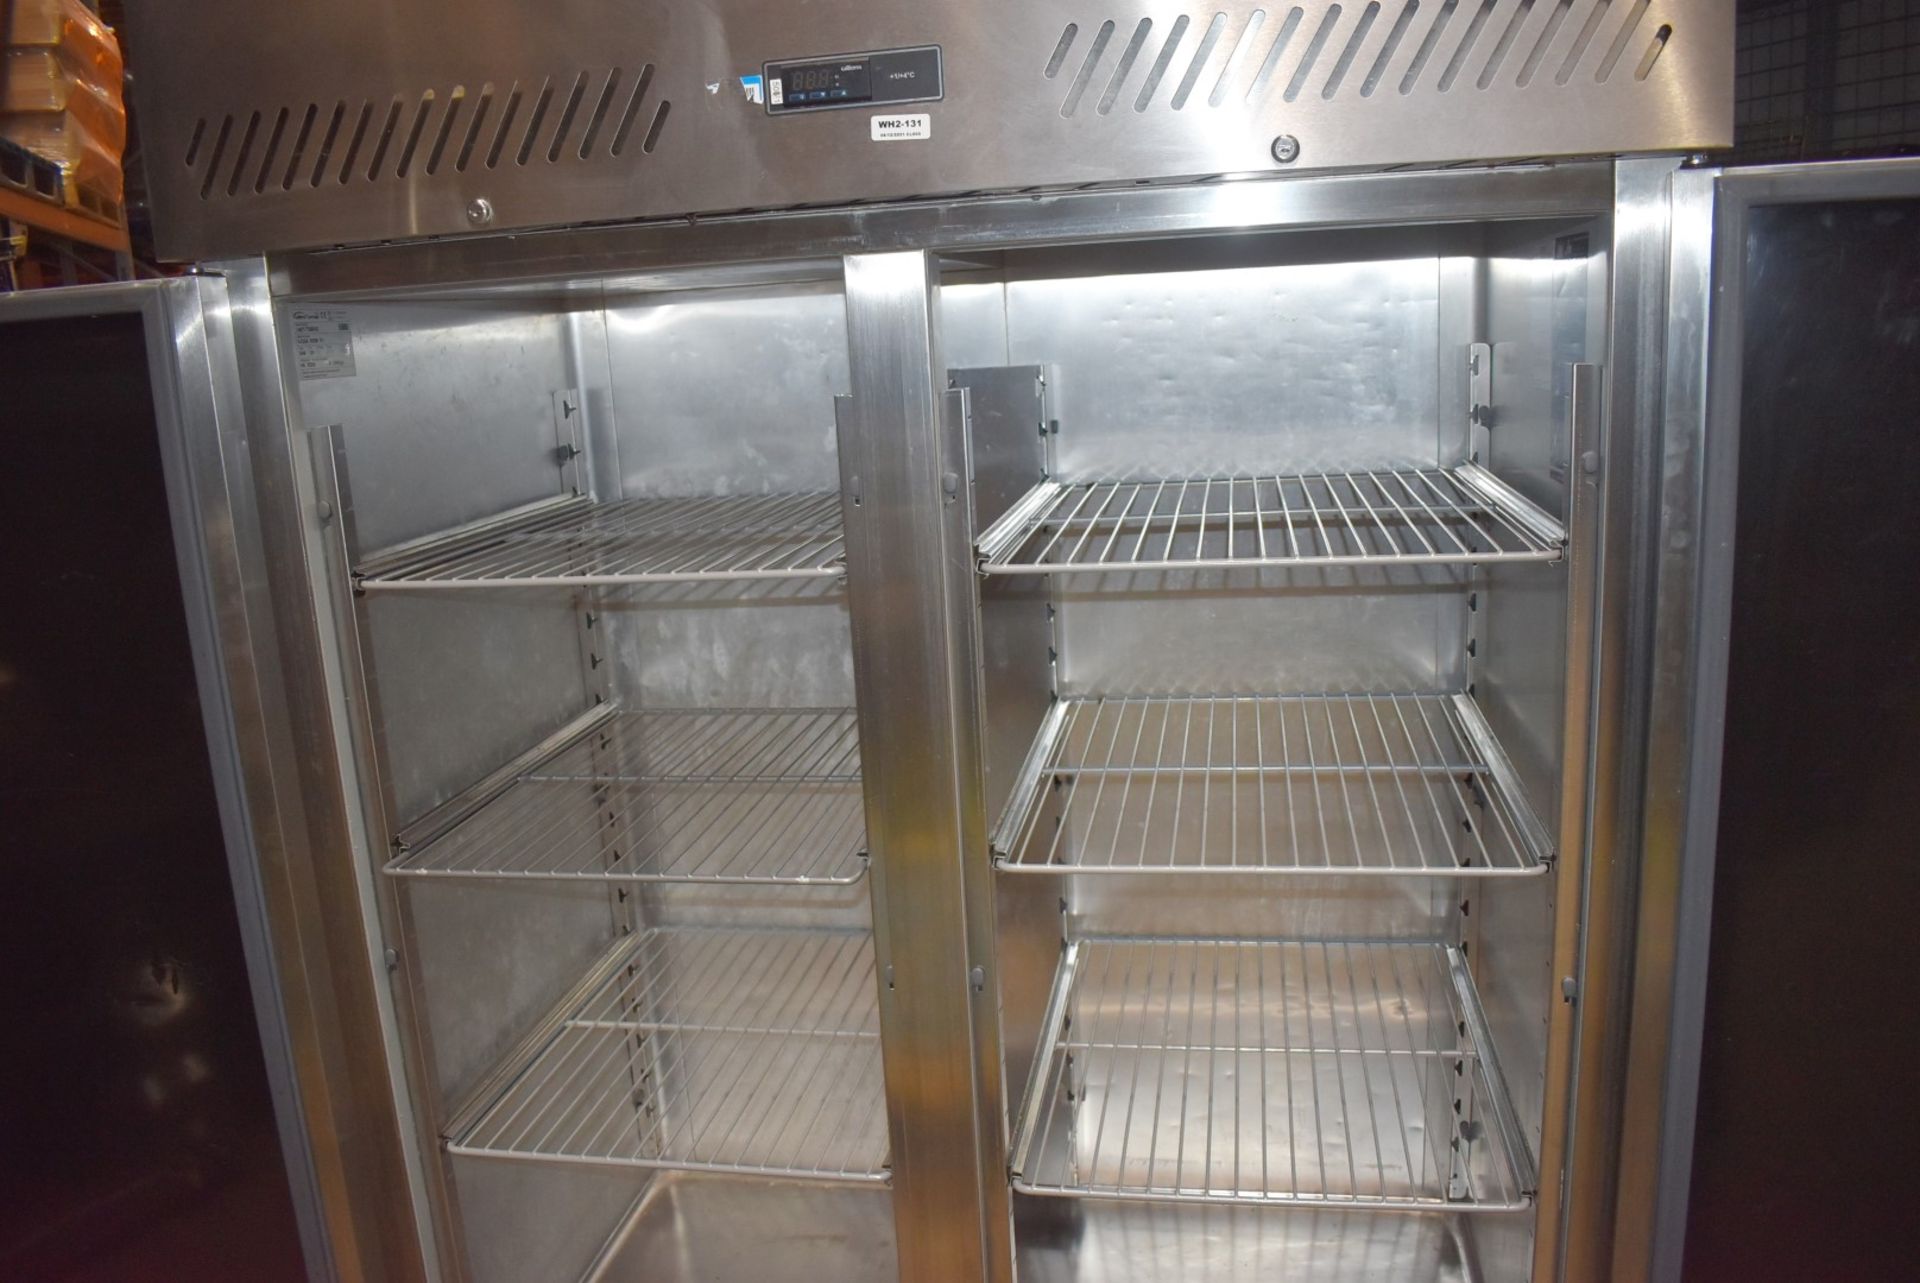 1 x Williams Upright Double Door Refrigerator With Stainless Steel Exterior - Model HS2SA - Recently - Image 15 of 20